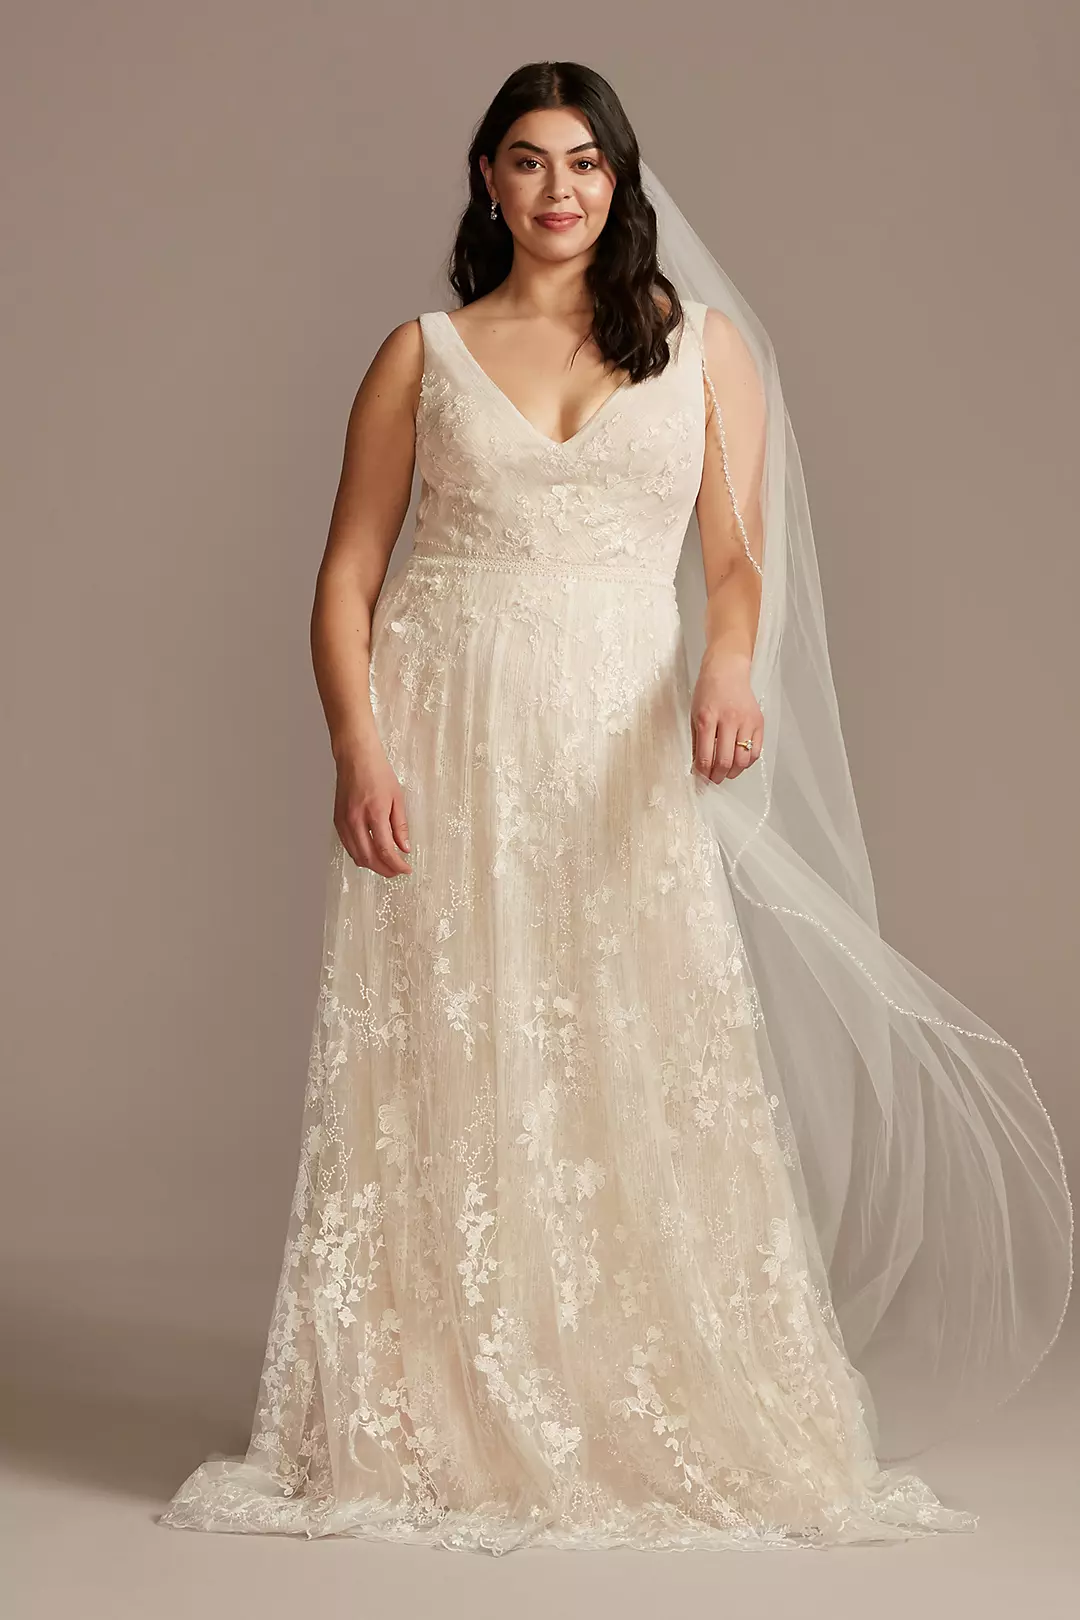 Floral Embroidered Wedding Dress with Veiled Train Image